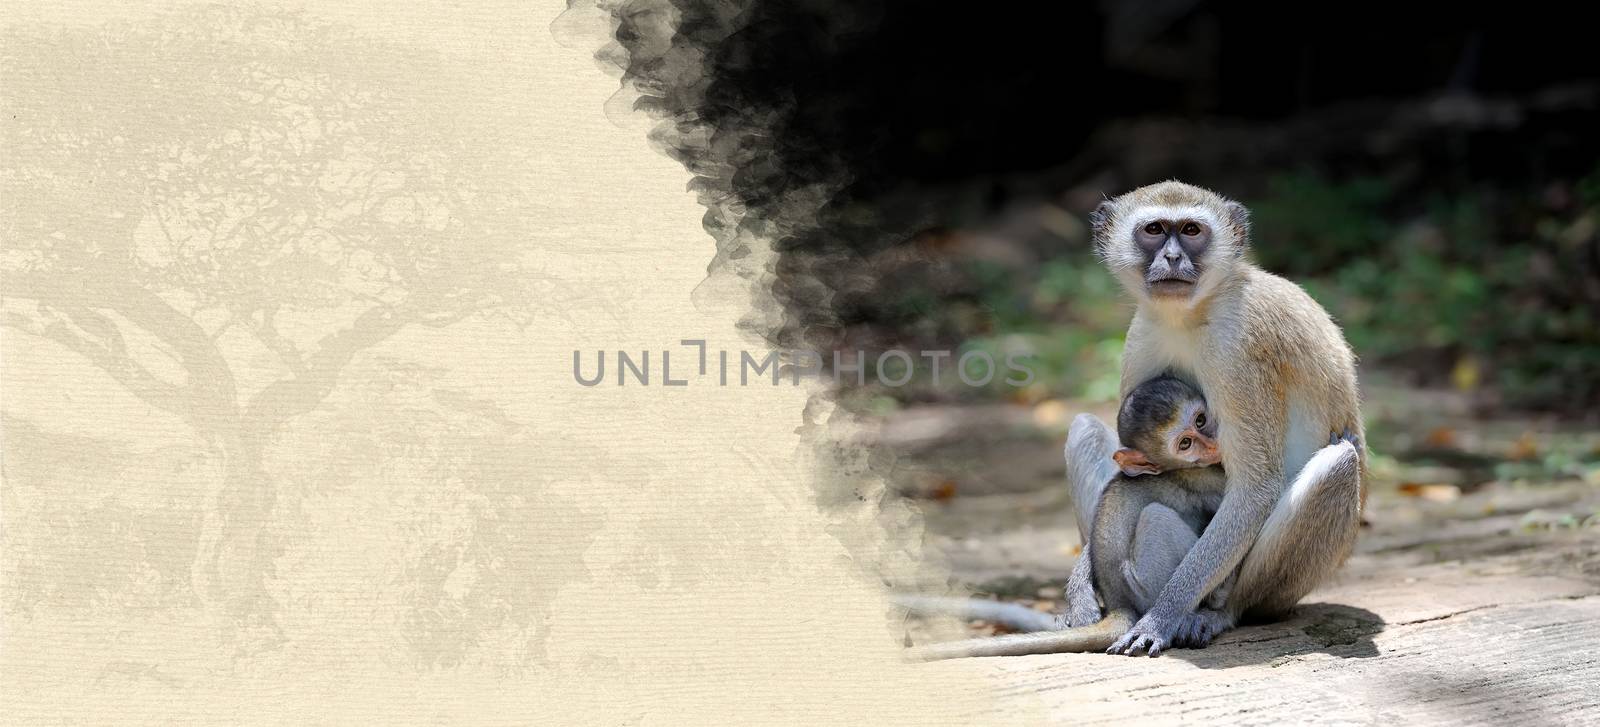 Monkey on textured paper. Animal on a background of old paper